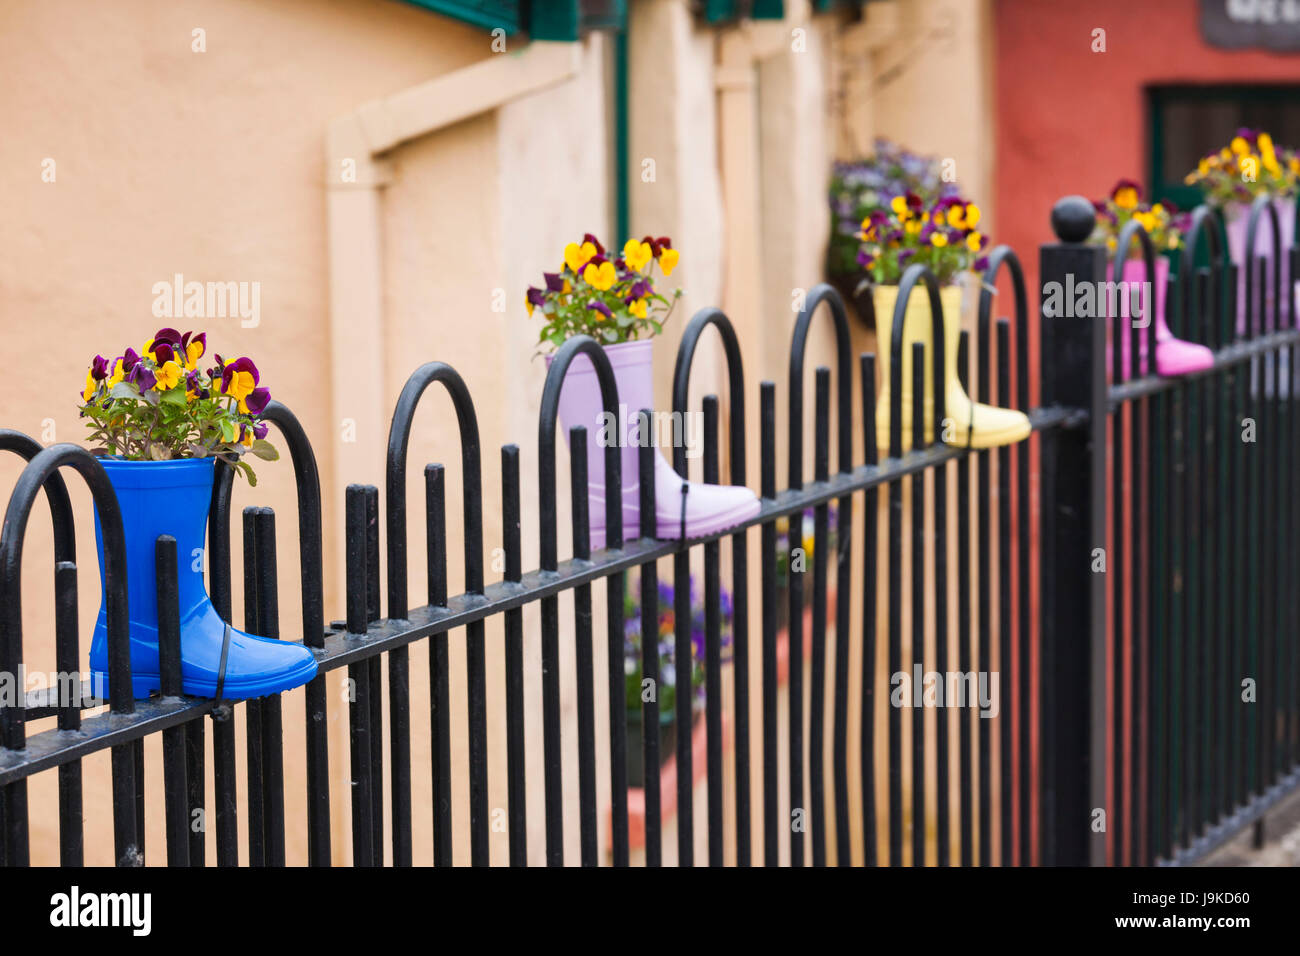 Ireland, County Kerry, Dingle Peninsula, Cloghane, fence decorated with children's boots Stock Photo